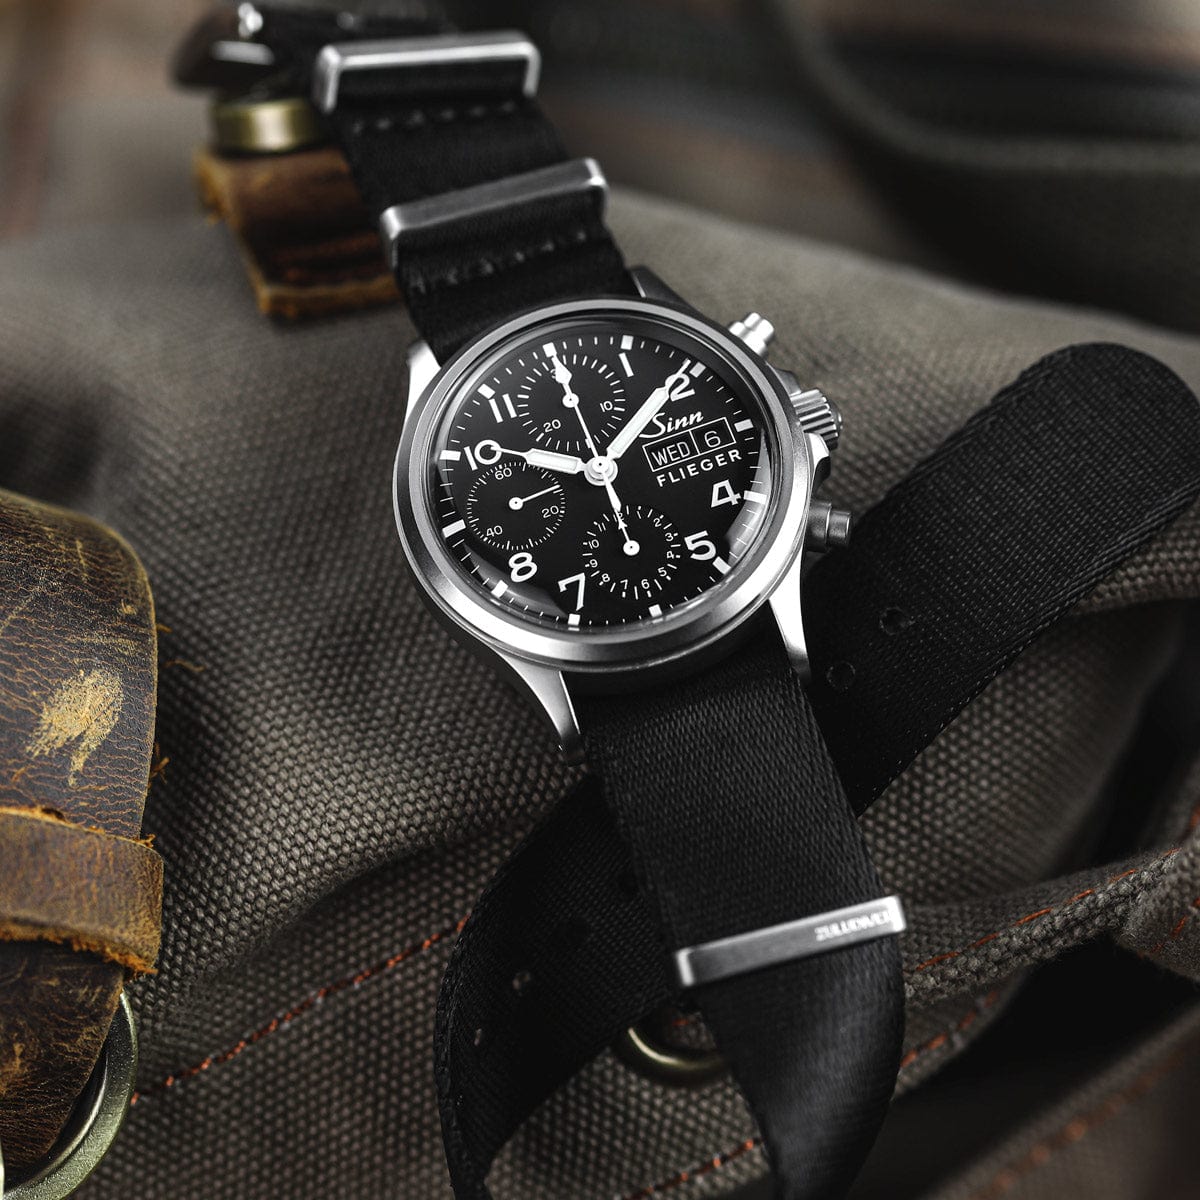 ZULUDIVER 1973 British Military Watch Strap: ARMOURED RECON - Military Black, Polished